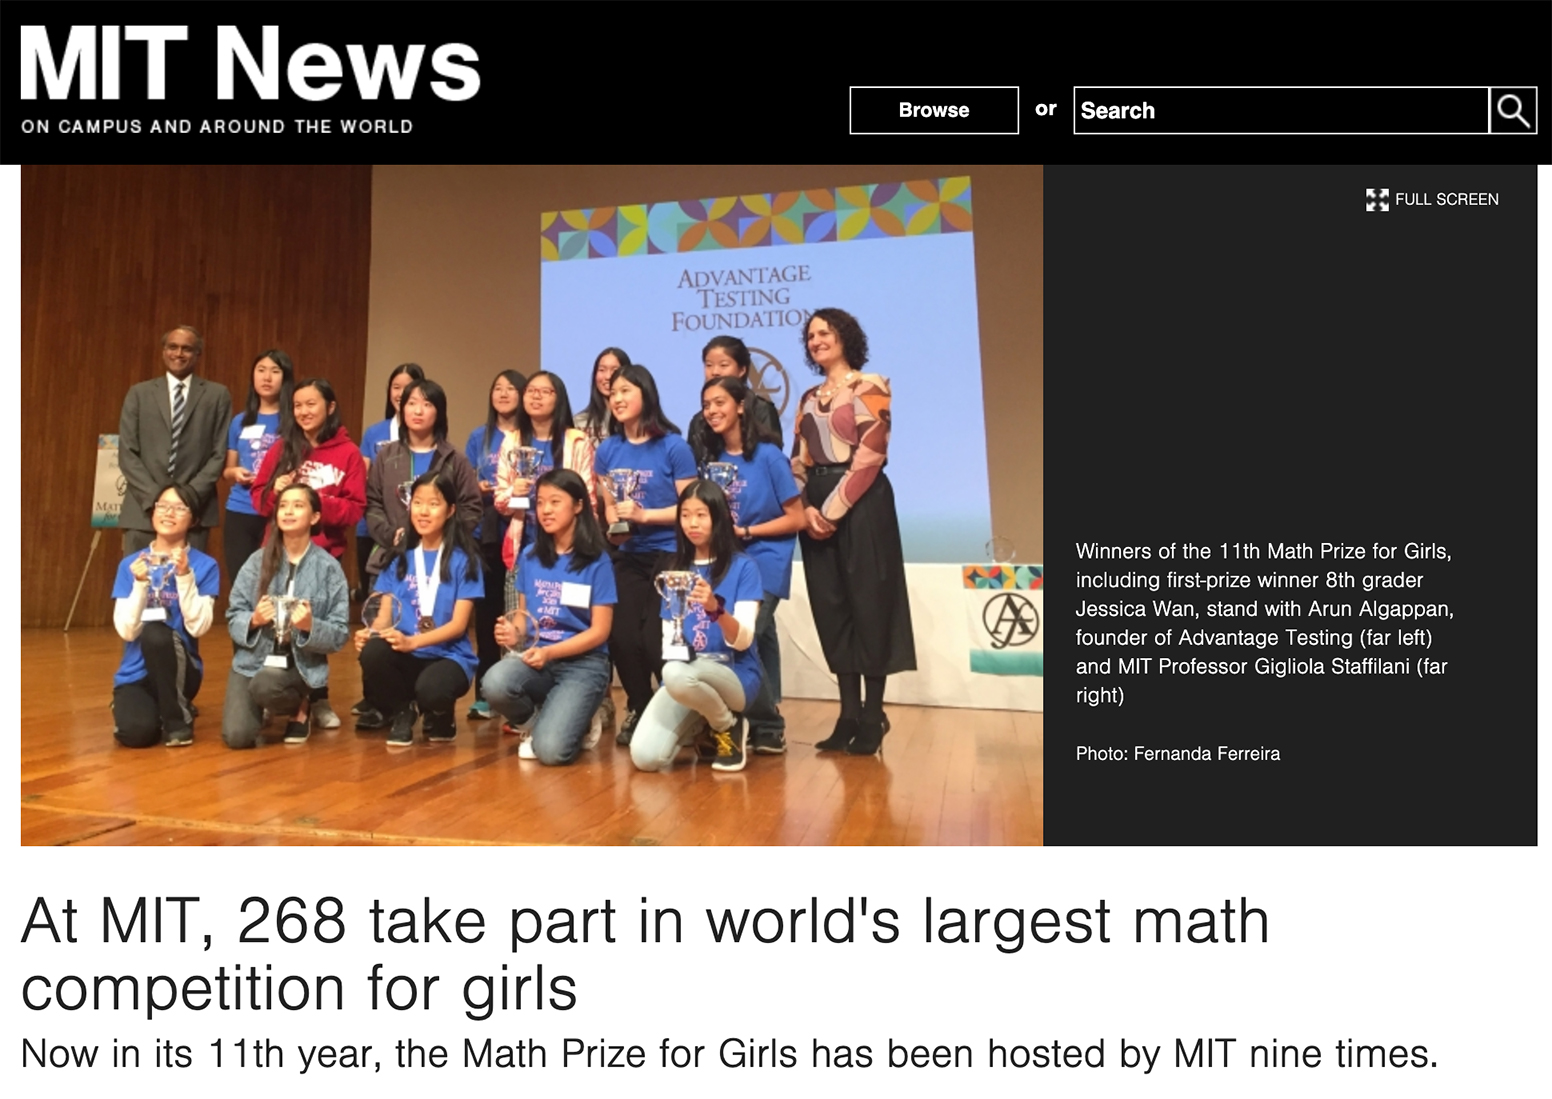 At MIT, 268 take part in world's largest math competition for girls